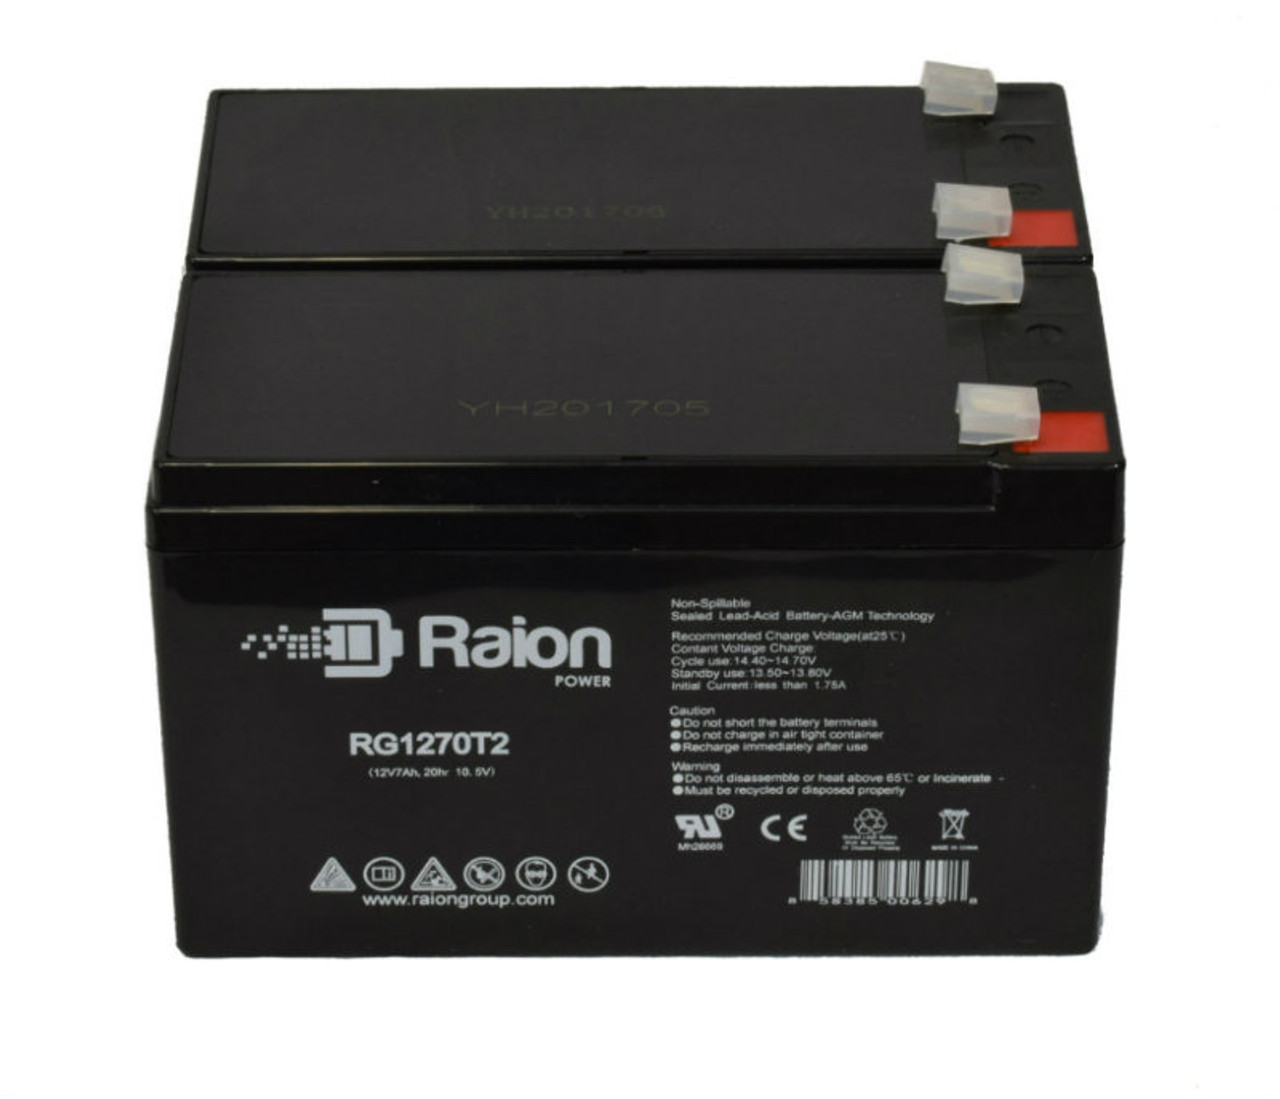 Raion Power Replacement 12V 7Ah Battery for Stannah Starla 600 Straight Stairlift - 2 Pack